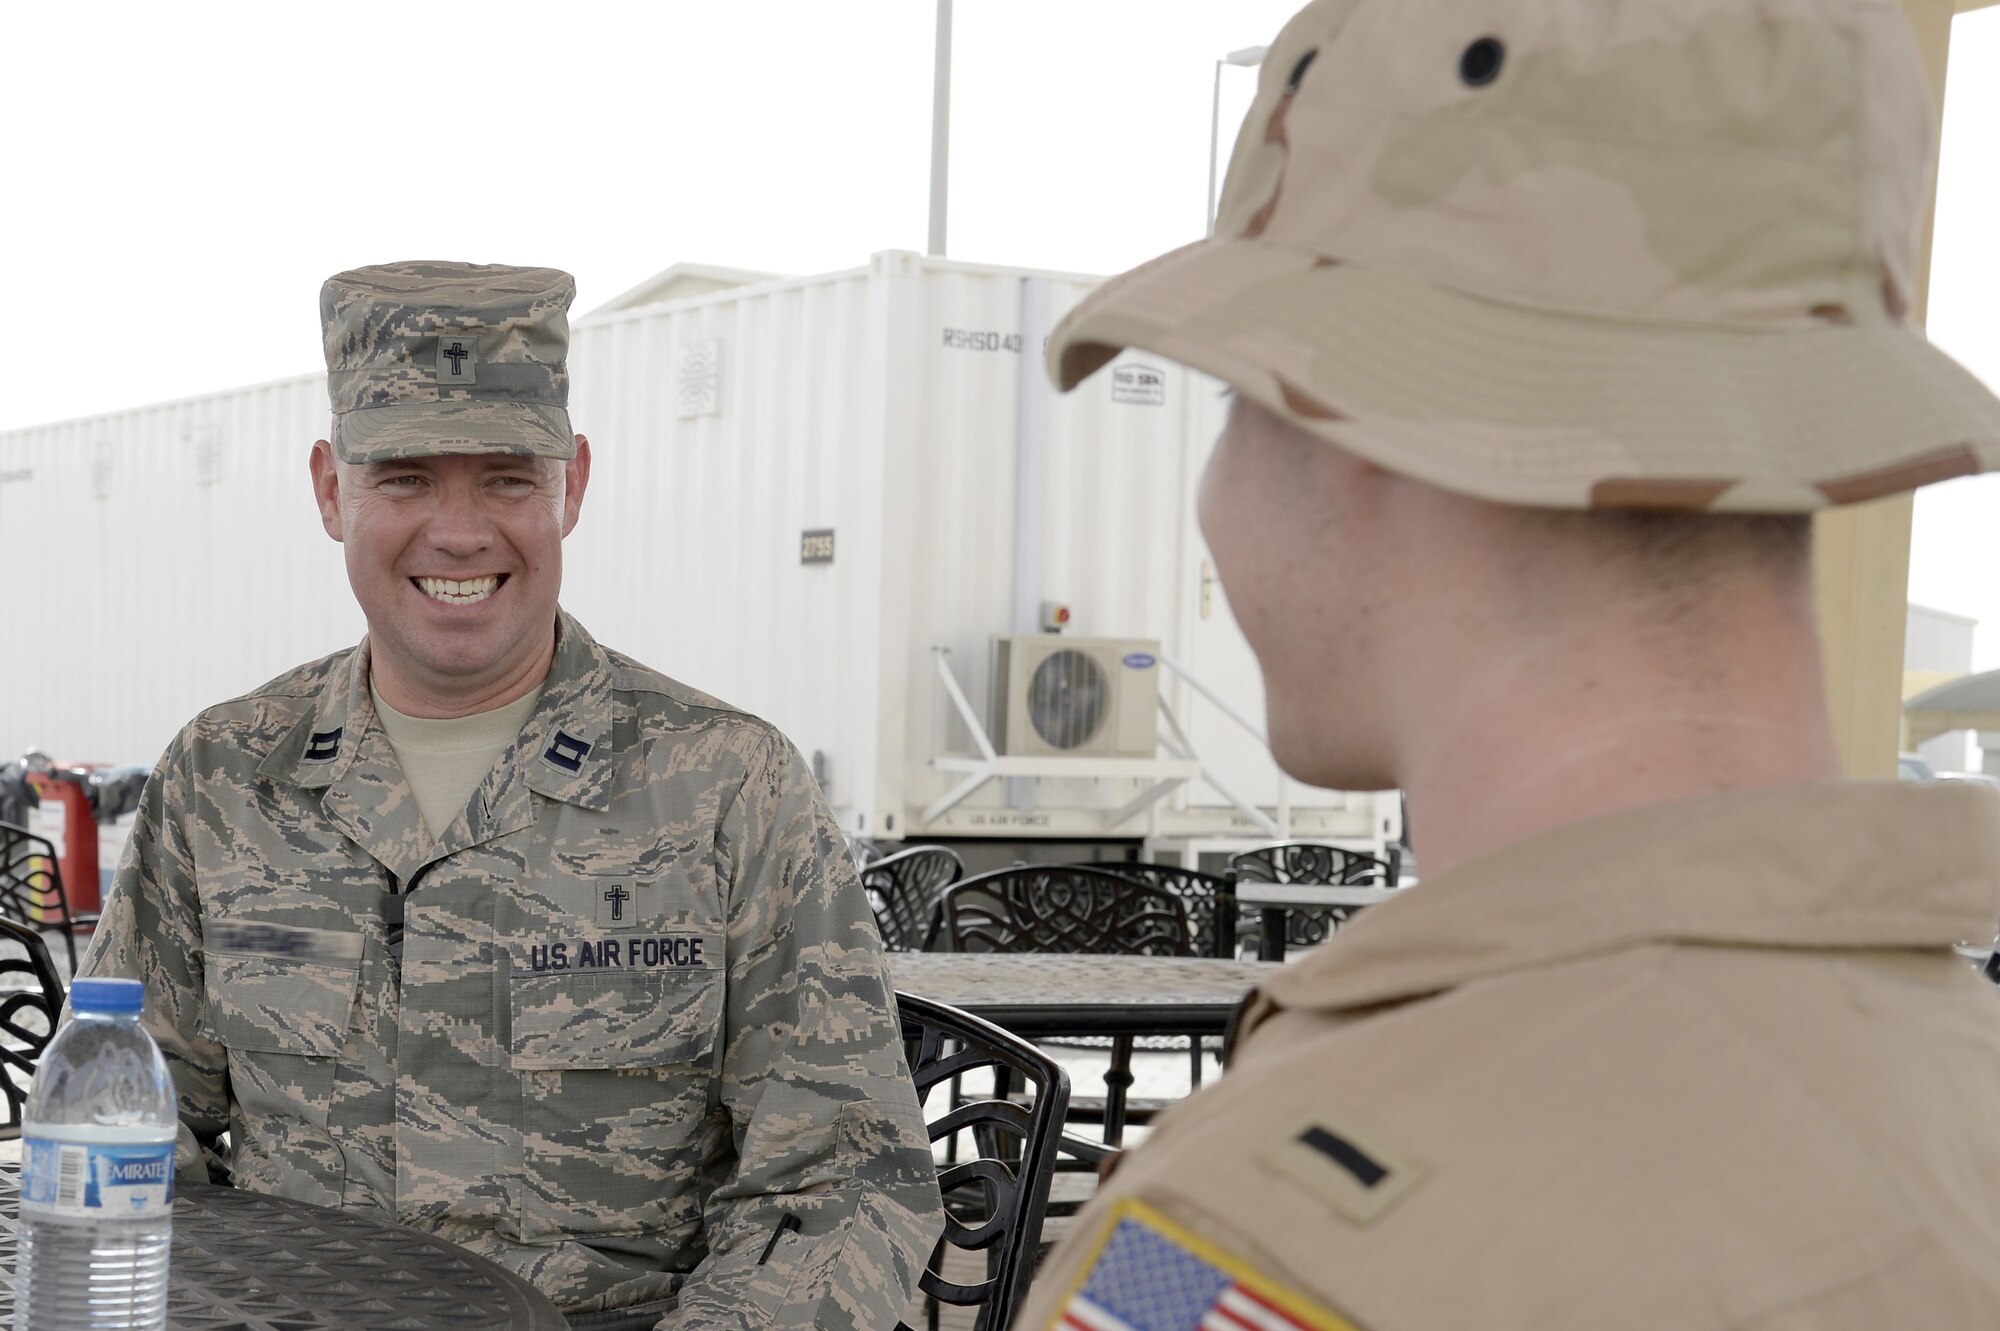 Chaplain Michael, Seven Sands Chapel, talks with an Airman at an undisclosed location in Southwest Asia Mar. 11, 2015. The chapel team is made up religious support teams that take care of the souls of the warfighter through what they call unit ministries or unit engagements. Michael is currently deployed from Offutt Air Force Base, Neb., and is a native of Yuma, Ariz. (U.S. Air Force photo/Tech. Sgt. Marie Brown)